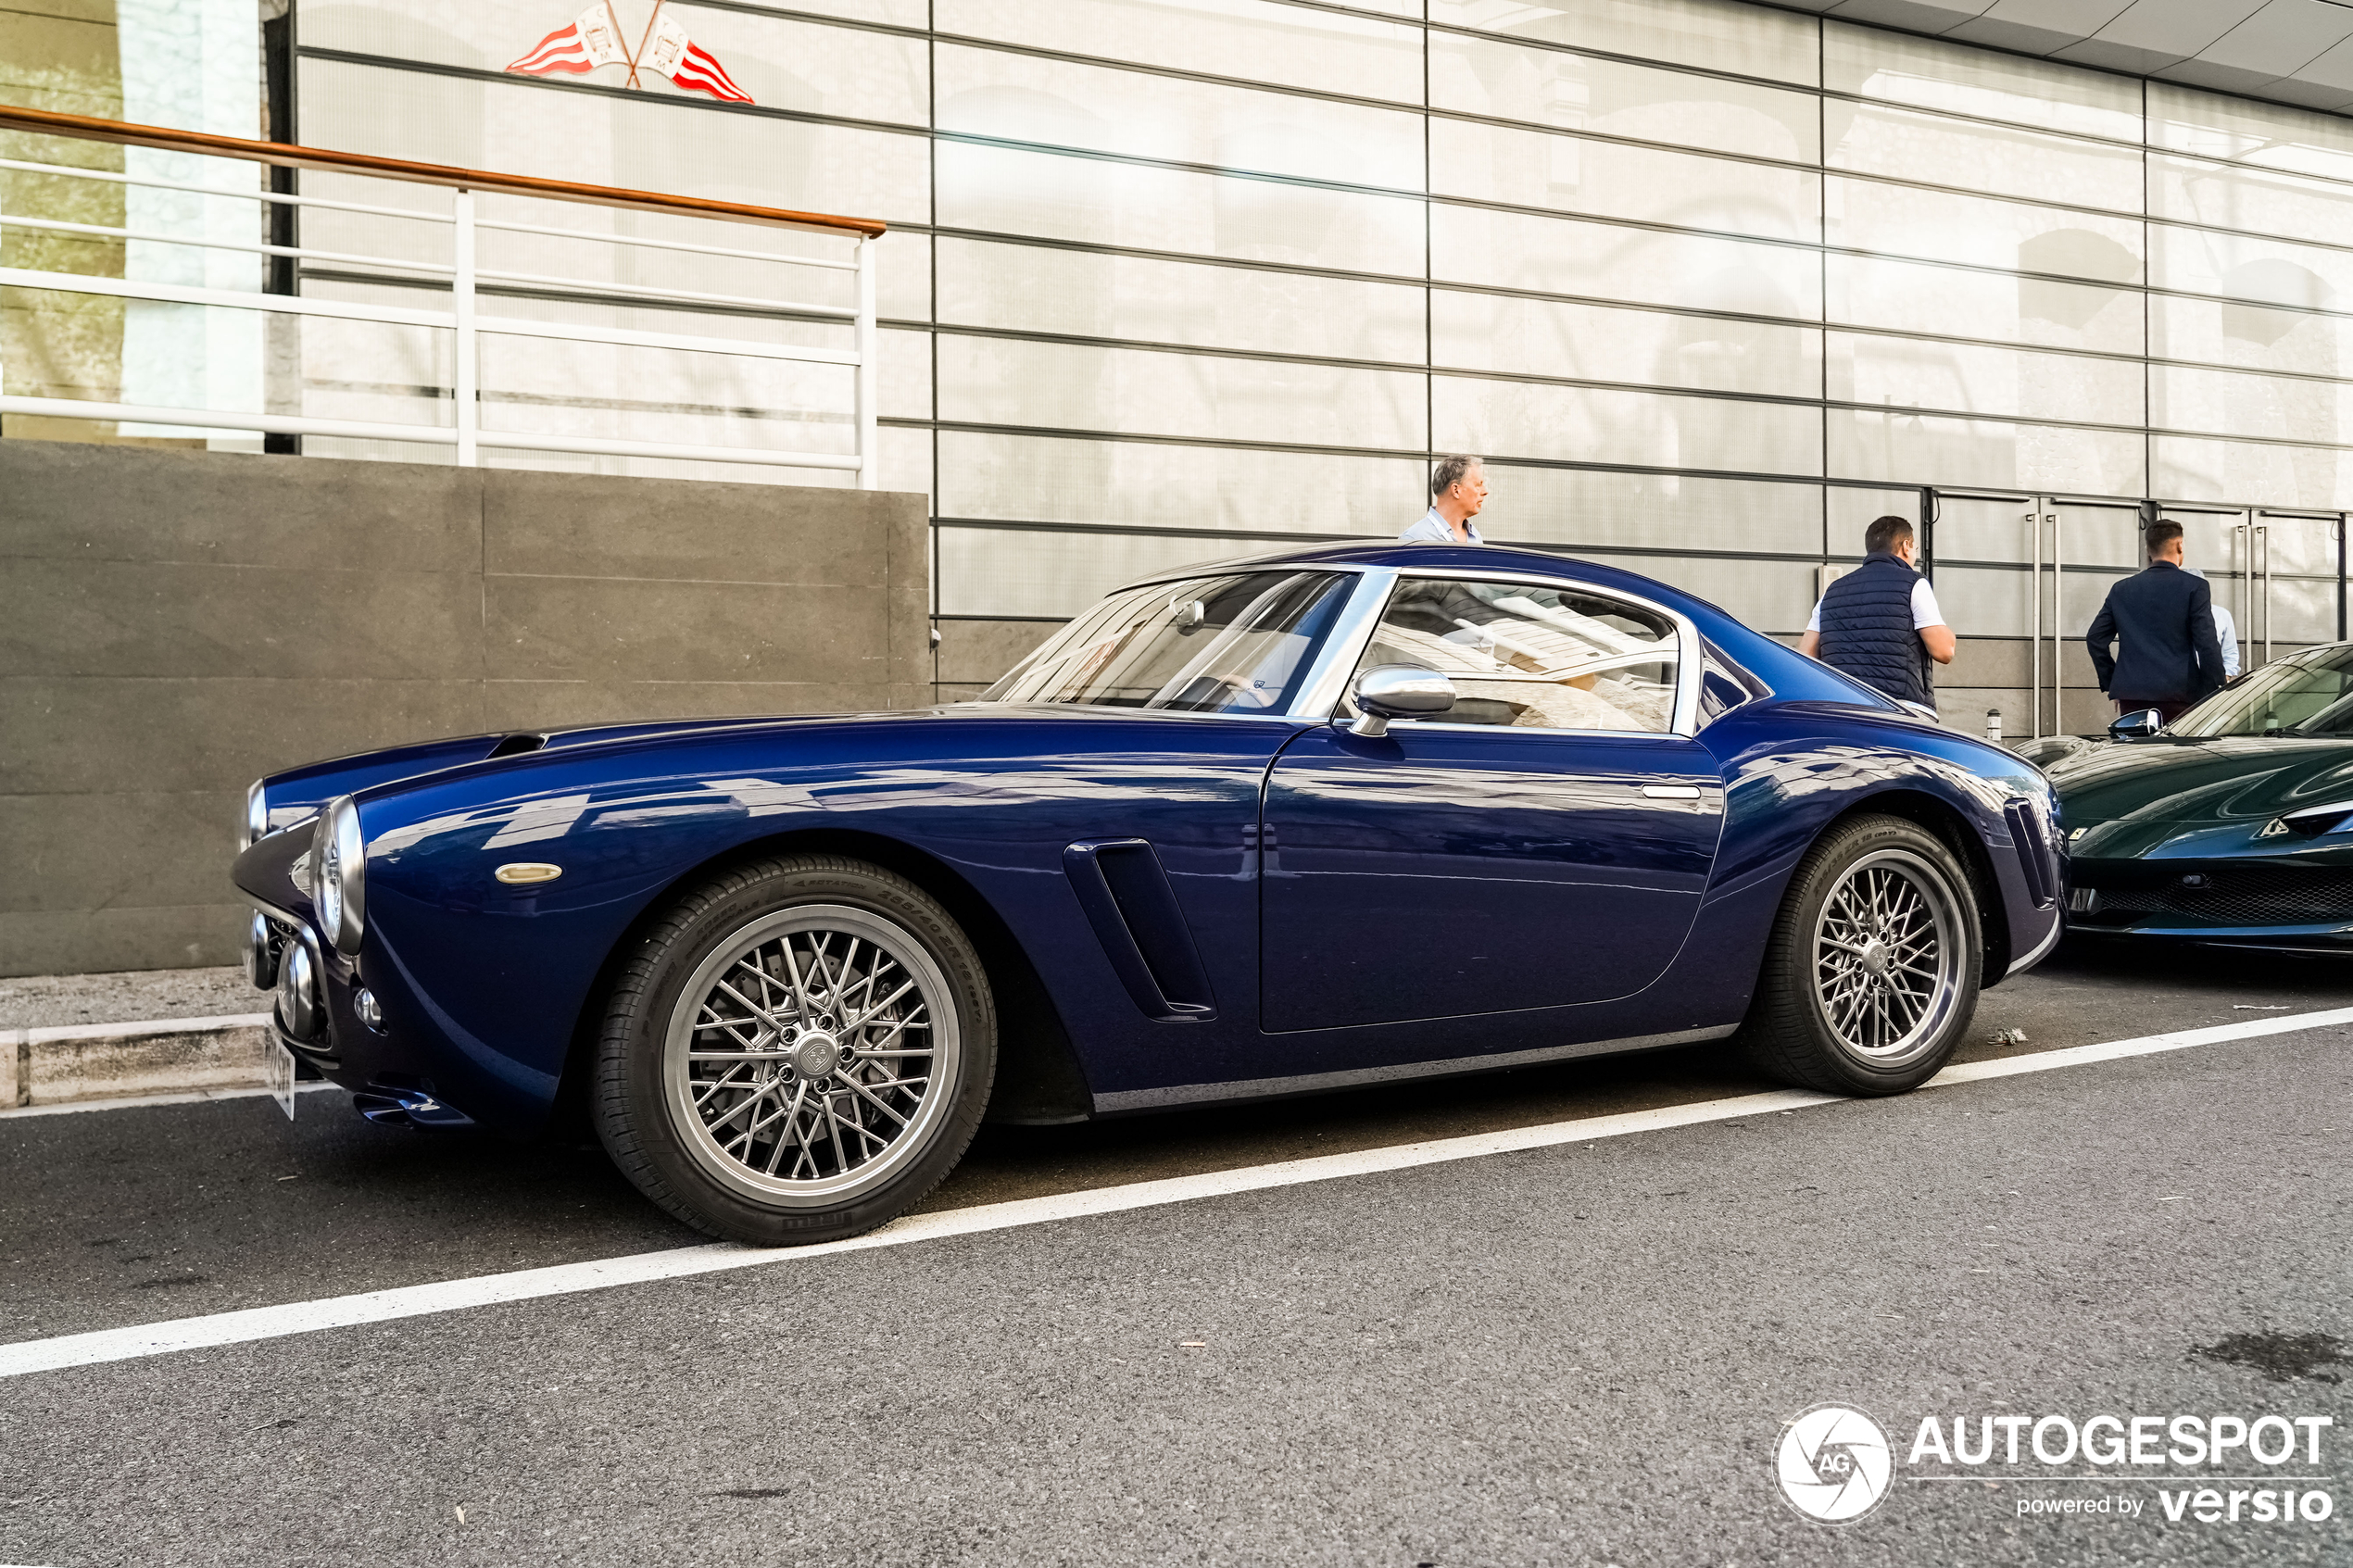 A new Restomod car shows up in Monaco